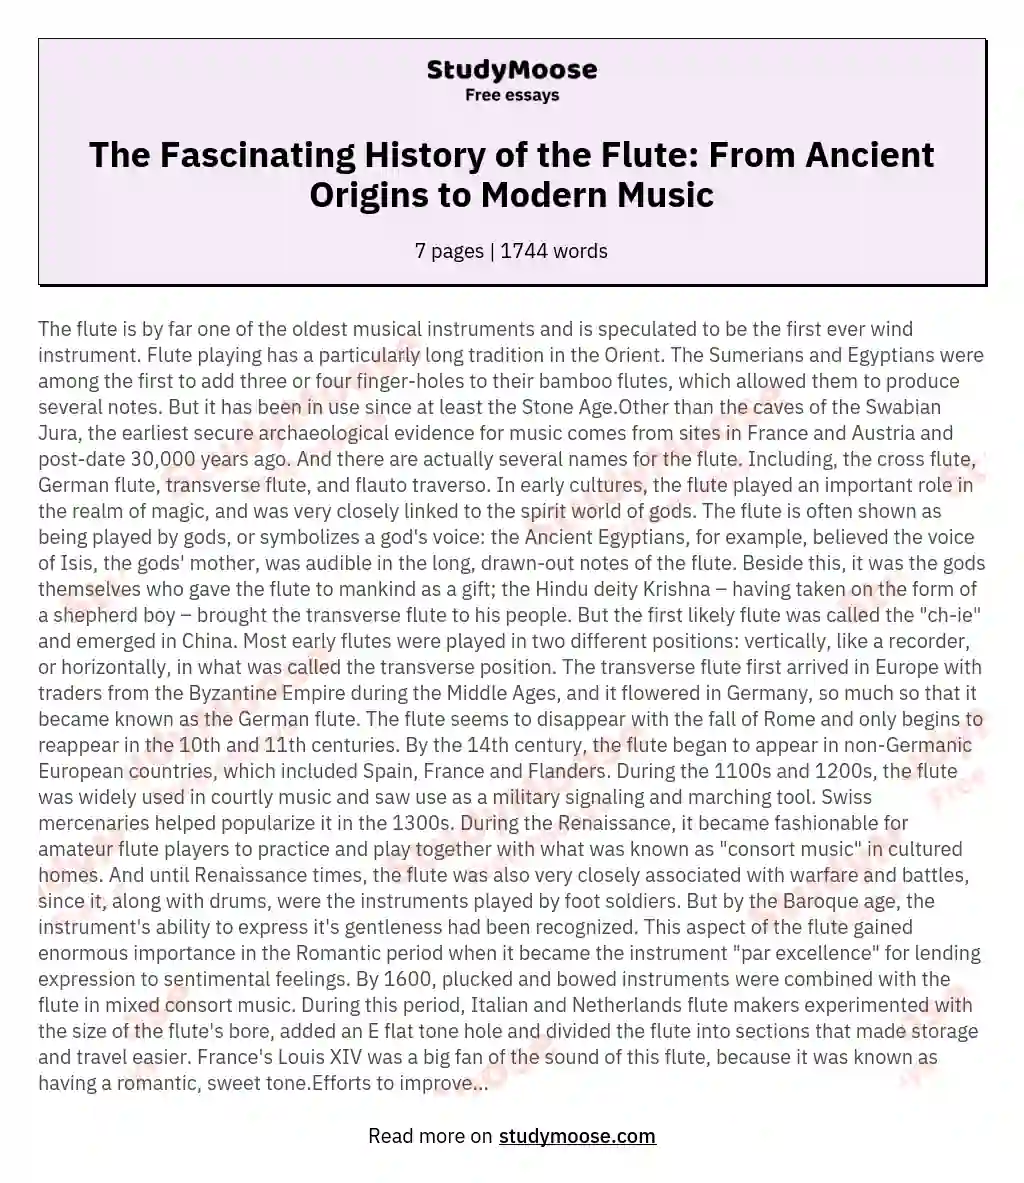 The Fascinating History of the Flute: From Ancient Origins to Modern Music essay